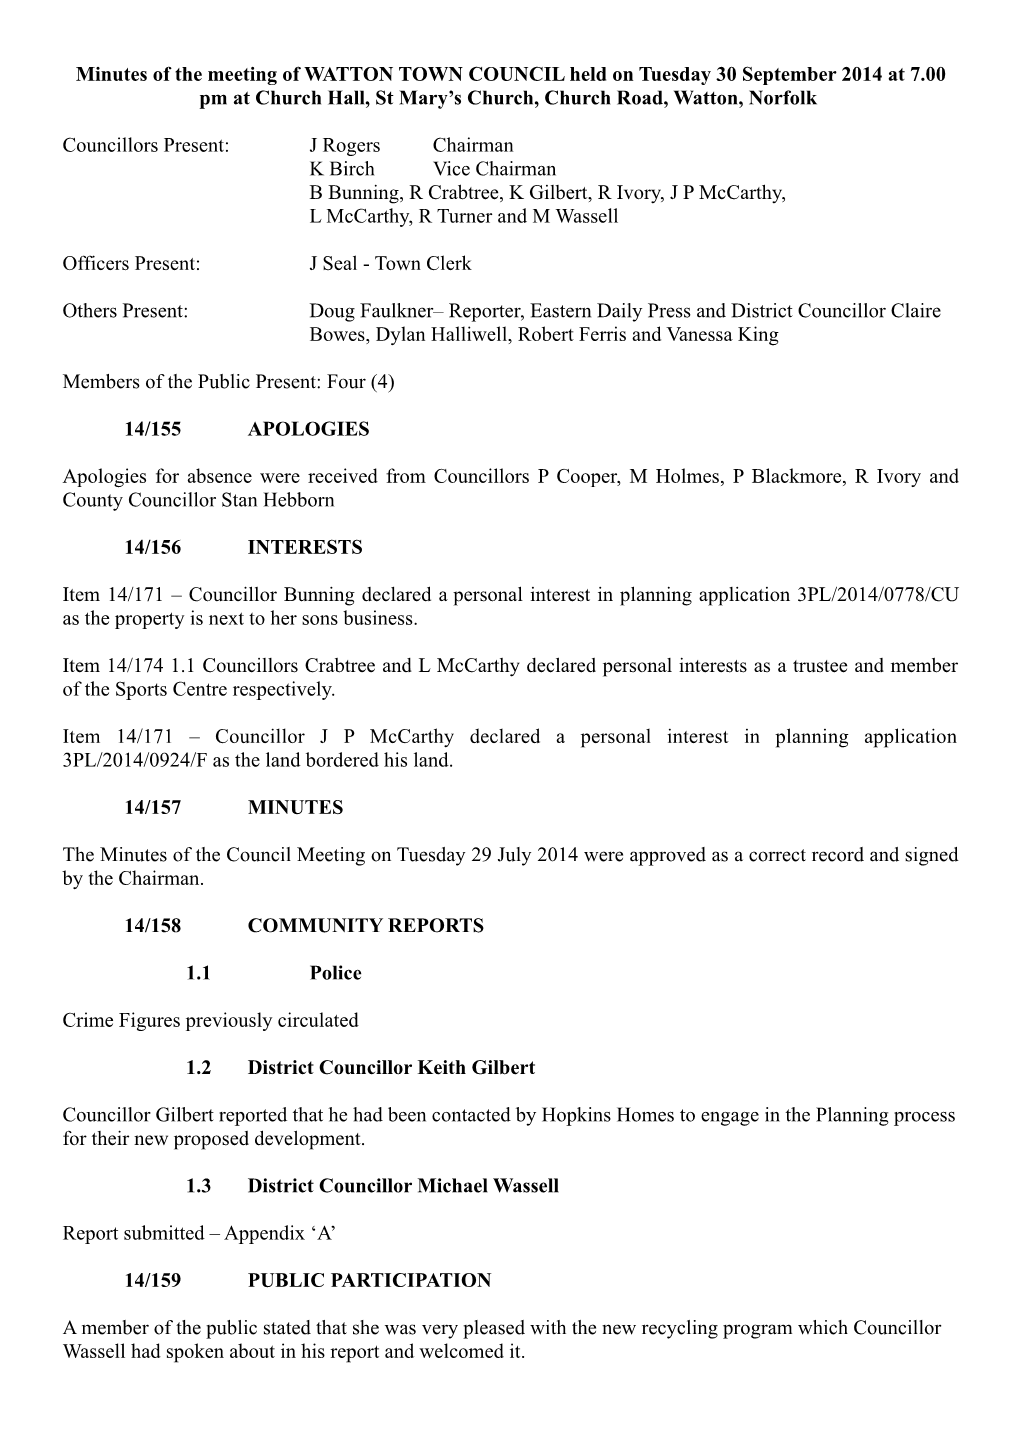 Minutes of the Meeting of WATTON TOWN COUNCIL Held on Tuesday 30 September 2014 at 7.00 Pm at Church Hall, St Mary’S Church, Church Road, Watton, Norfolk